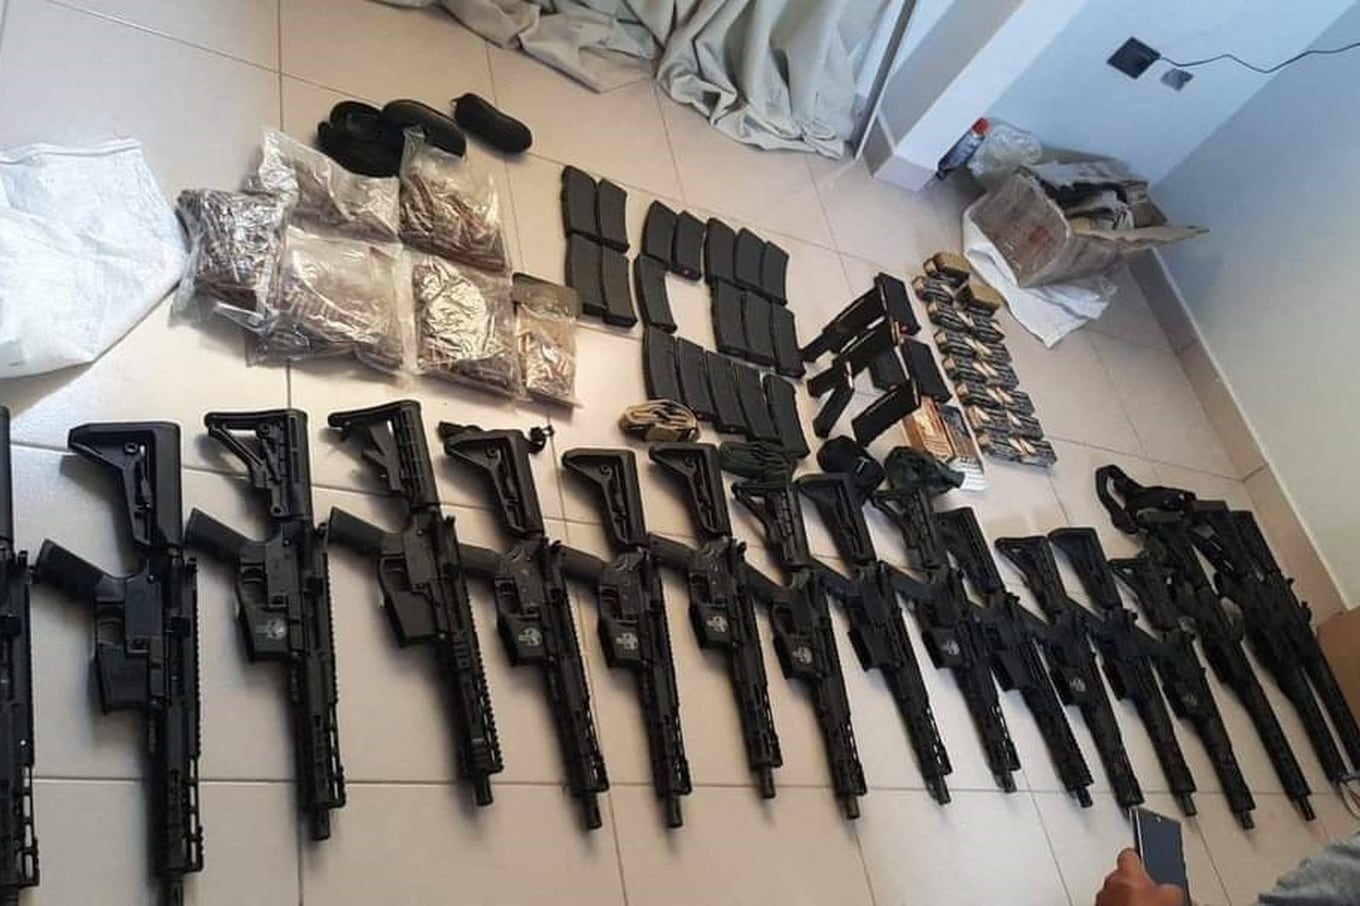 This handout picture released by the Bolivian Ministry of Government shows weaponry and drugs seized from a house searched by anti-narcotics police during an operation to try to arrest Uruguayan Sebastian Marset in Santa Cruz, Bolivia, on July 30, 2023. Bolivia has mobilized more than 2,250 security agents for a manhunt of a wanted cocaine trafficker who has ricocheted around the world to elude capture, a senior official said on Sunday. The target of the hunt is Sebastian Enrique Marset Cabrera, wanted on drugs charges in his native Uruguay, Paraguay, Brazil and the United States. (Photo by Handout / Bolivian Ministry of Government / AFP) / RESTRICTED TO EDITORIAL USE - MANDATORY CREDIT "AFP PHOTO / BOLIVIAN MINISTRY OF GOVERNMENT" - NO MARKETING NO ADVERTISING CAMPAIGNS - DISTRIBUTED AS A SERVICE TO CLIENTS